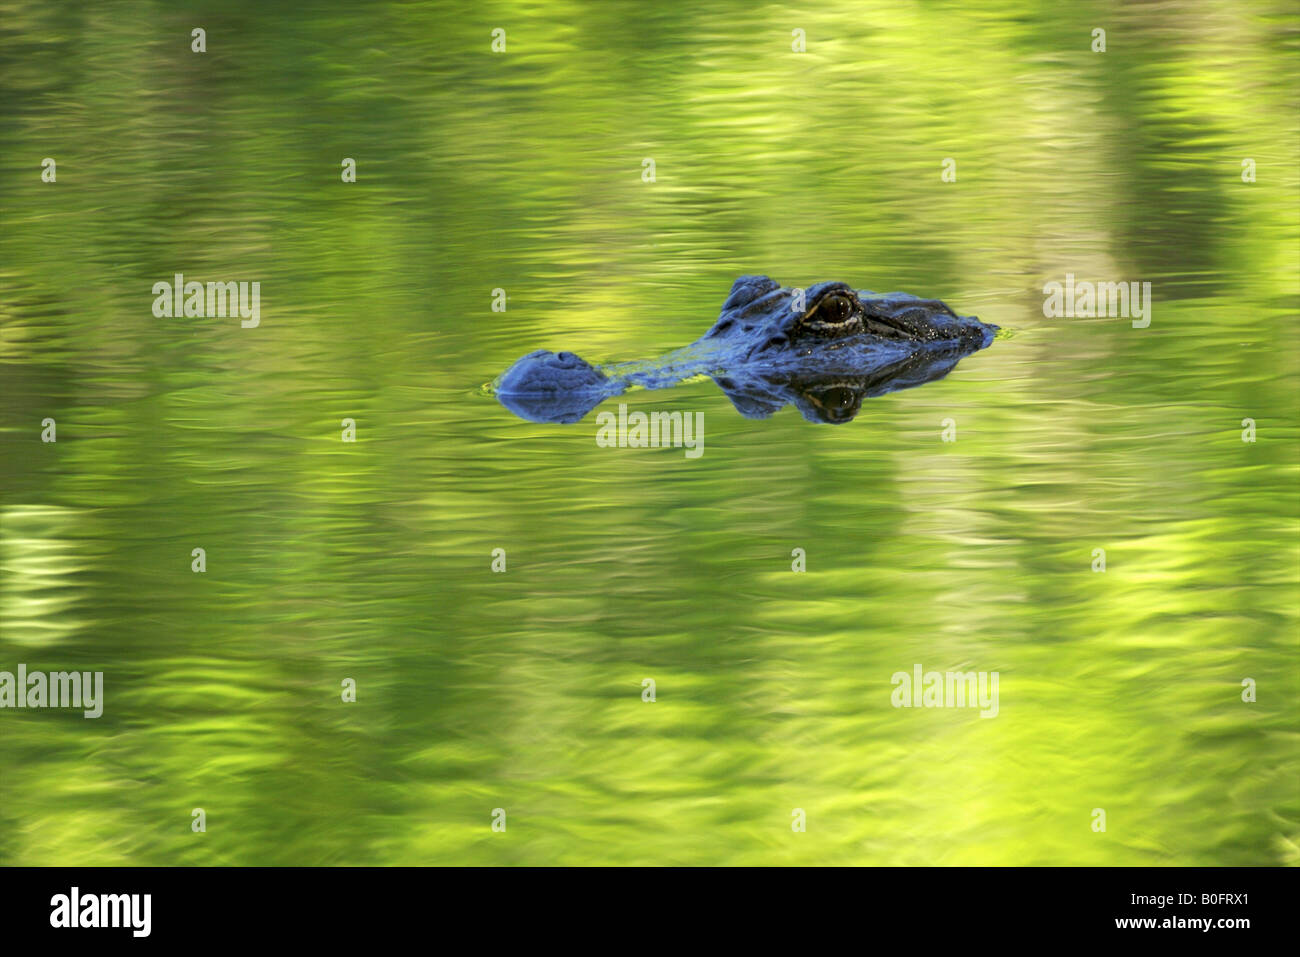 American Alligator floating in water with green reflections Atchafalaya National Wildlife Refuge Louisiana Stock Photo